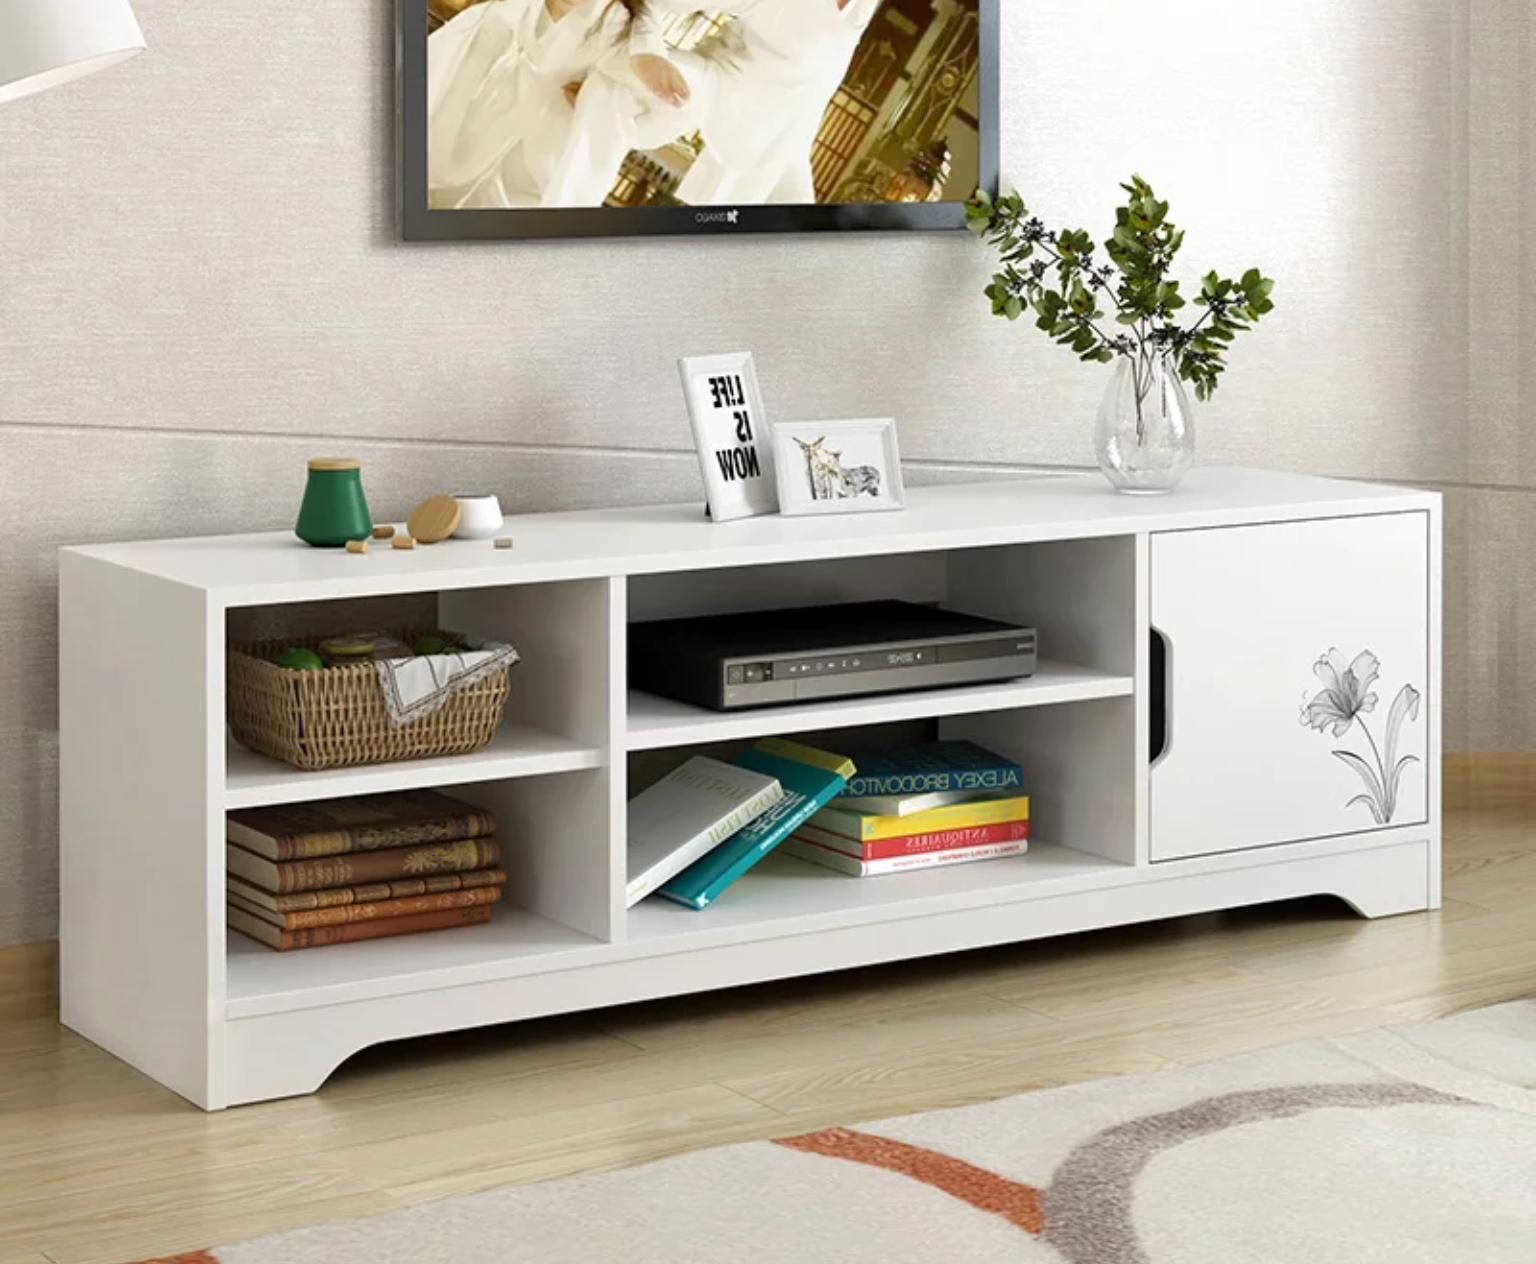 Popular Tv Rack For Sale – Tv Cabinet Prices, Brands & Review In Philippines With Regard To Single Shelf Tv Stands (View 14 of 20)